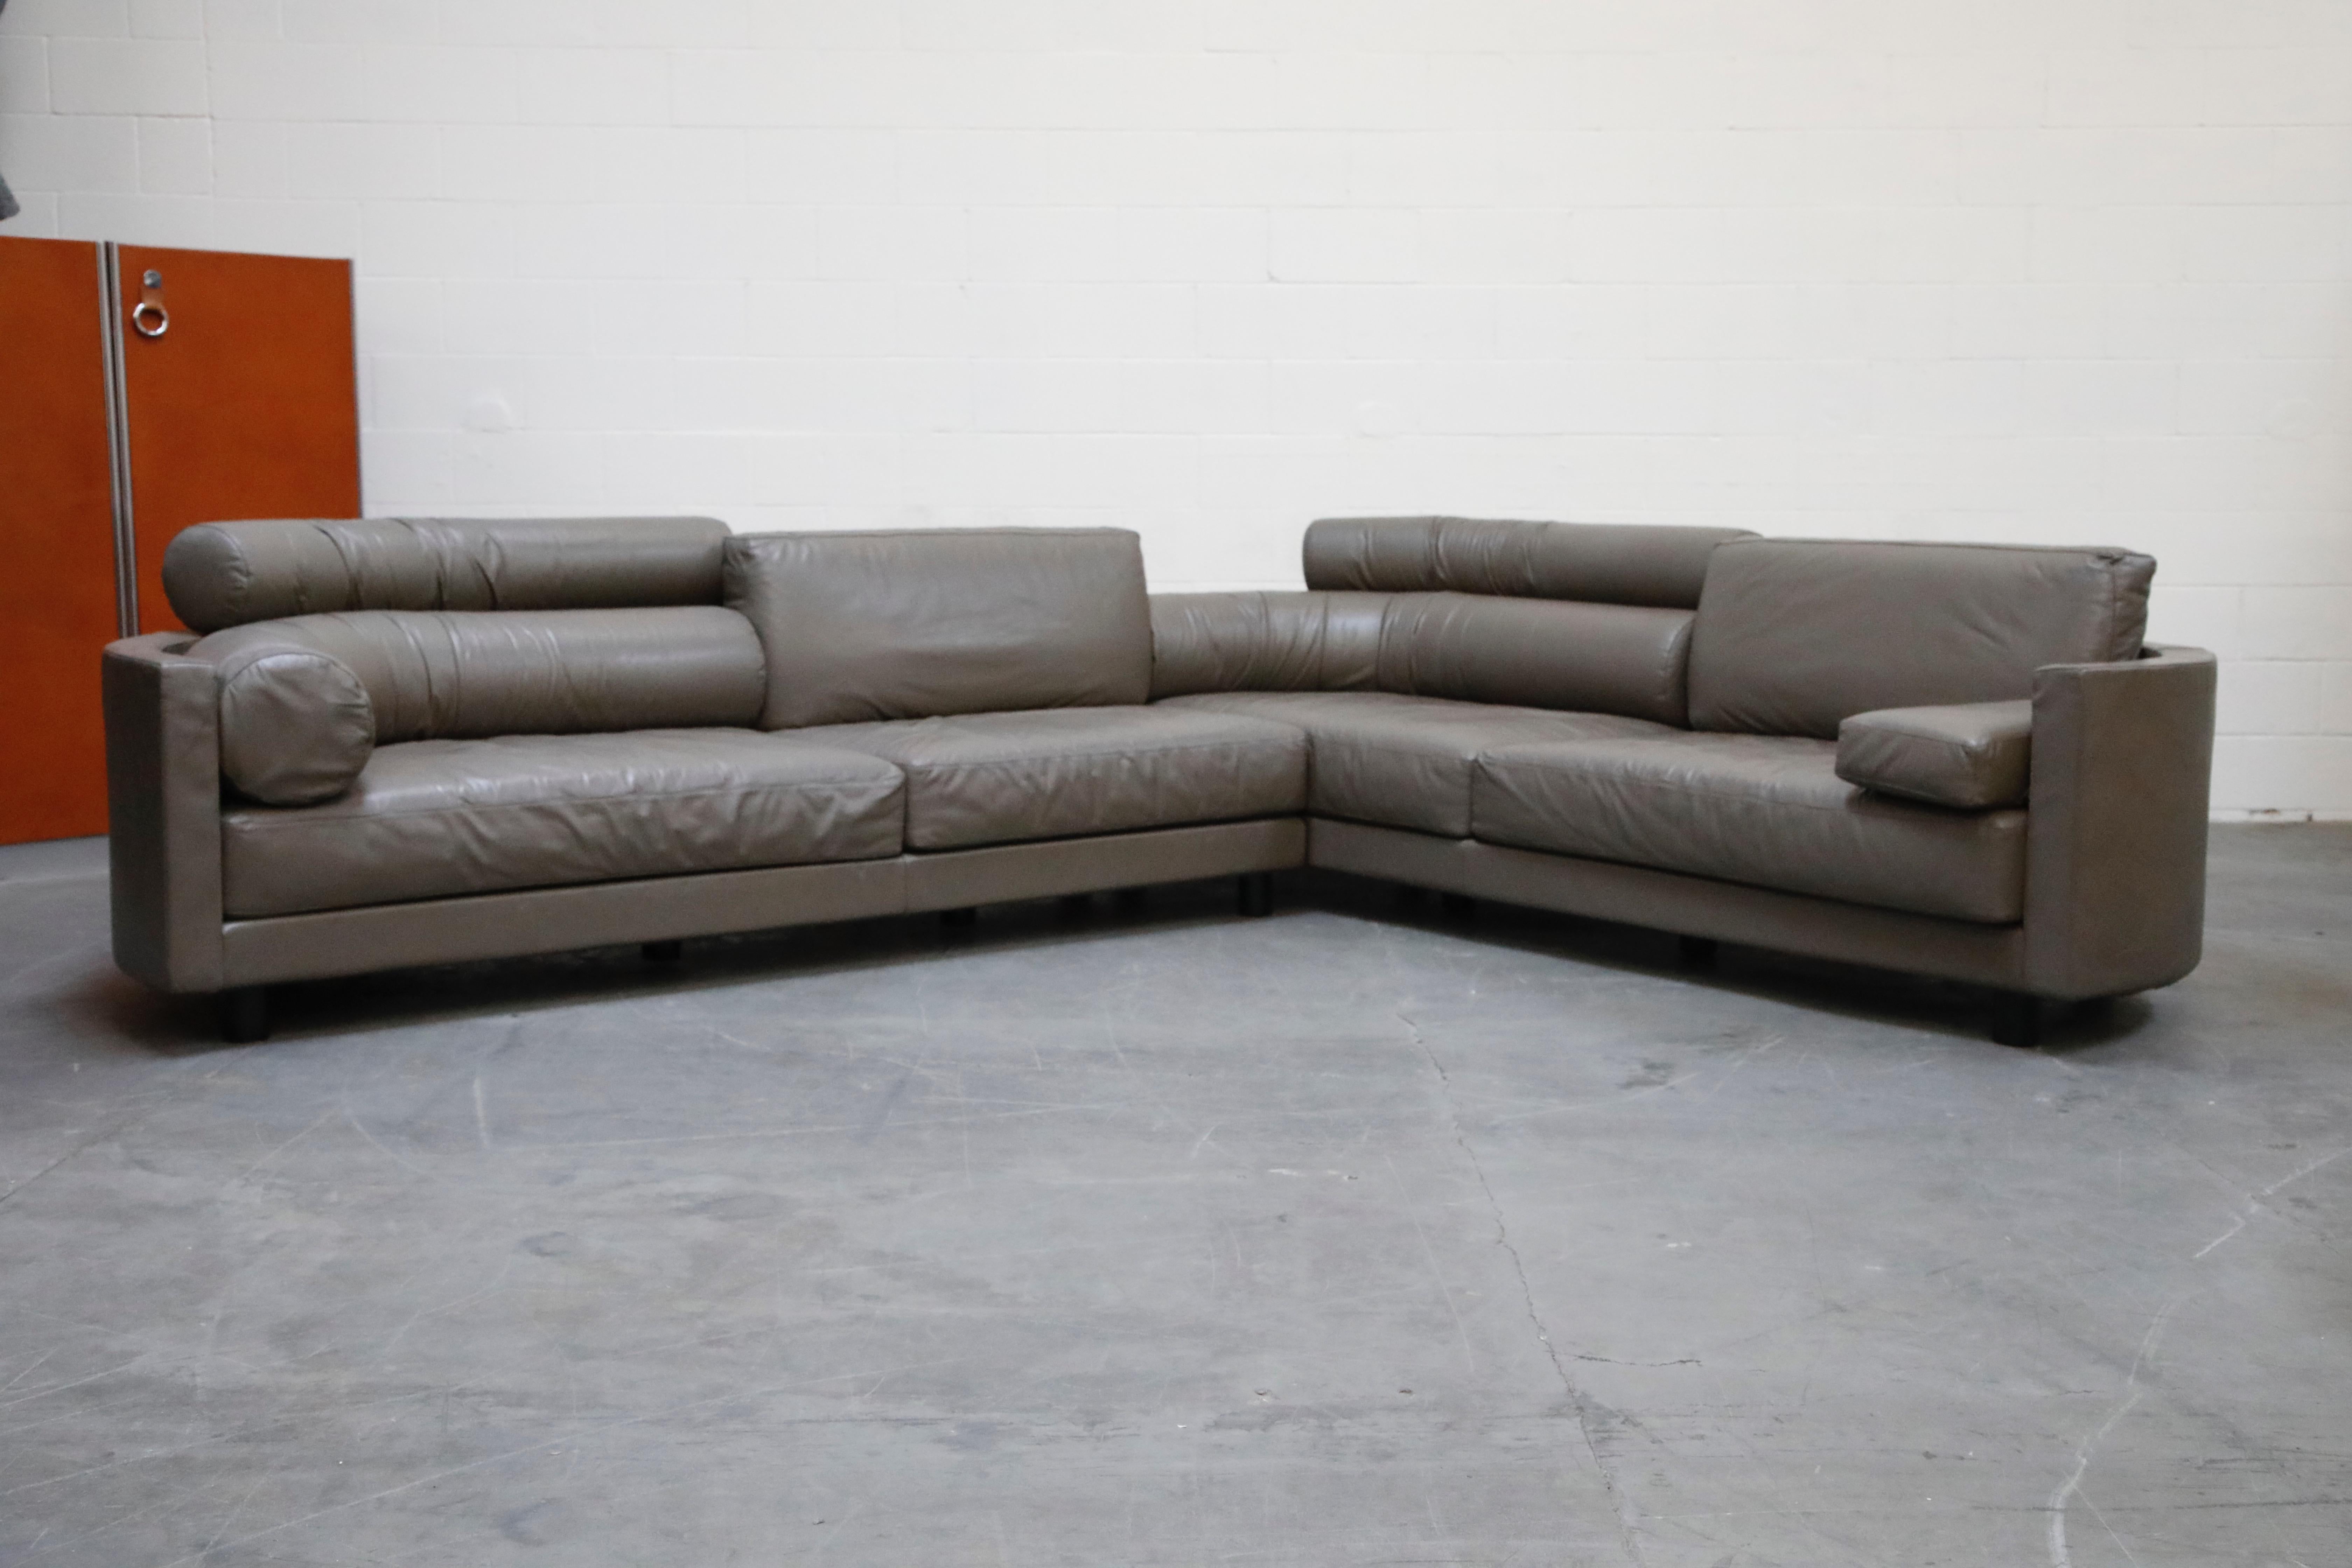 This Postmodern sectional sofa was designed by Antonietta Ammannati and Giampiero Vitelli in 1988 for Italian maker i4 Mariani and was featured in a number of movies throughout the late 1980s and 1990s. Called the 'Molto-Di' collection, a number of